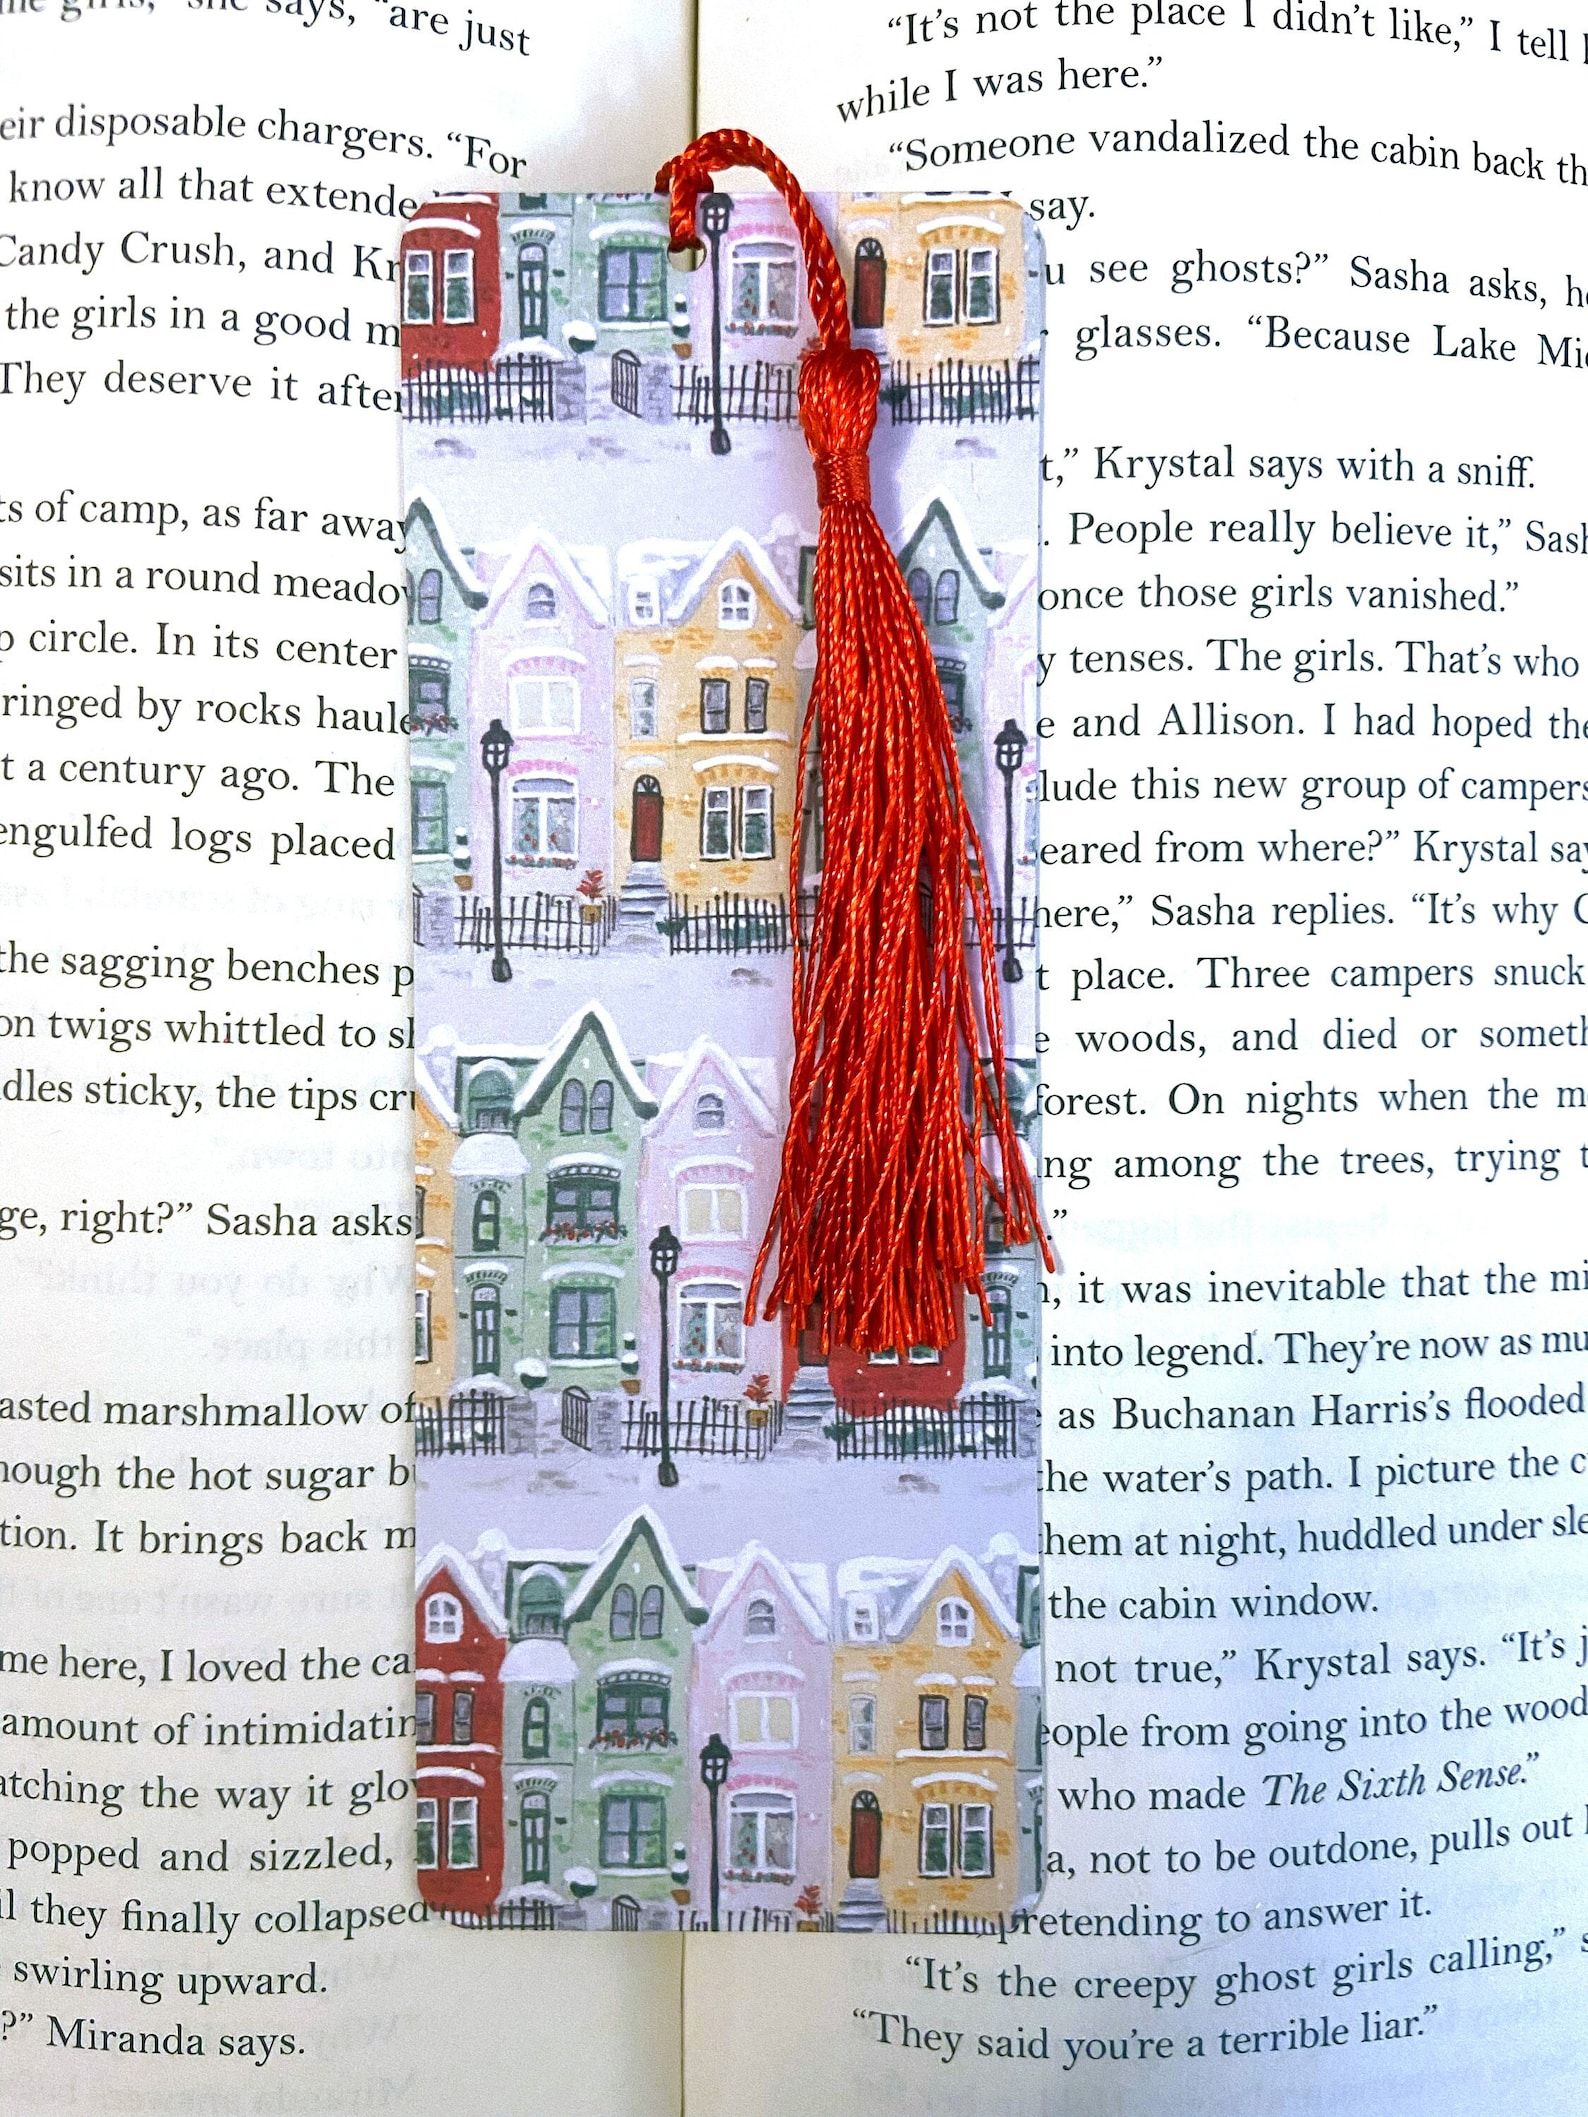 A snowy scene of colorful townhouses on a bookmark